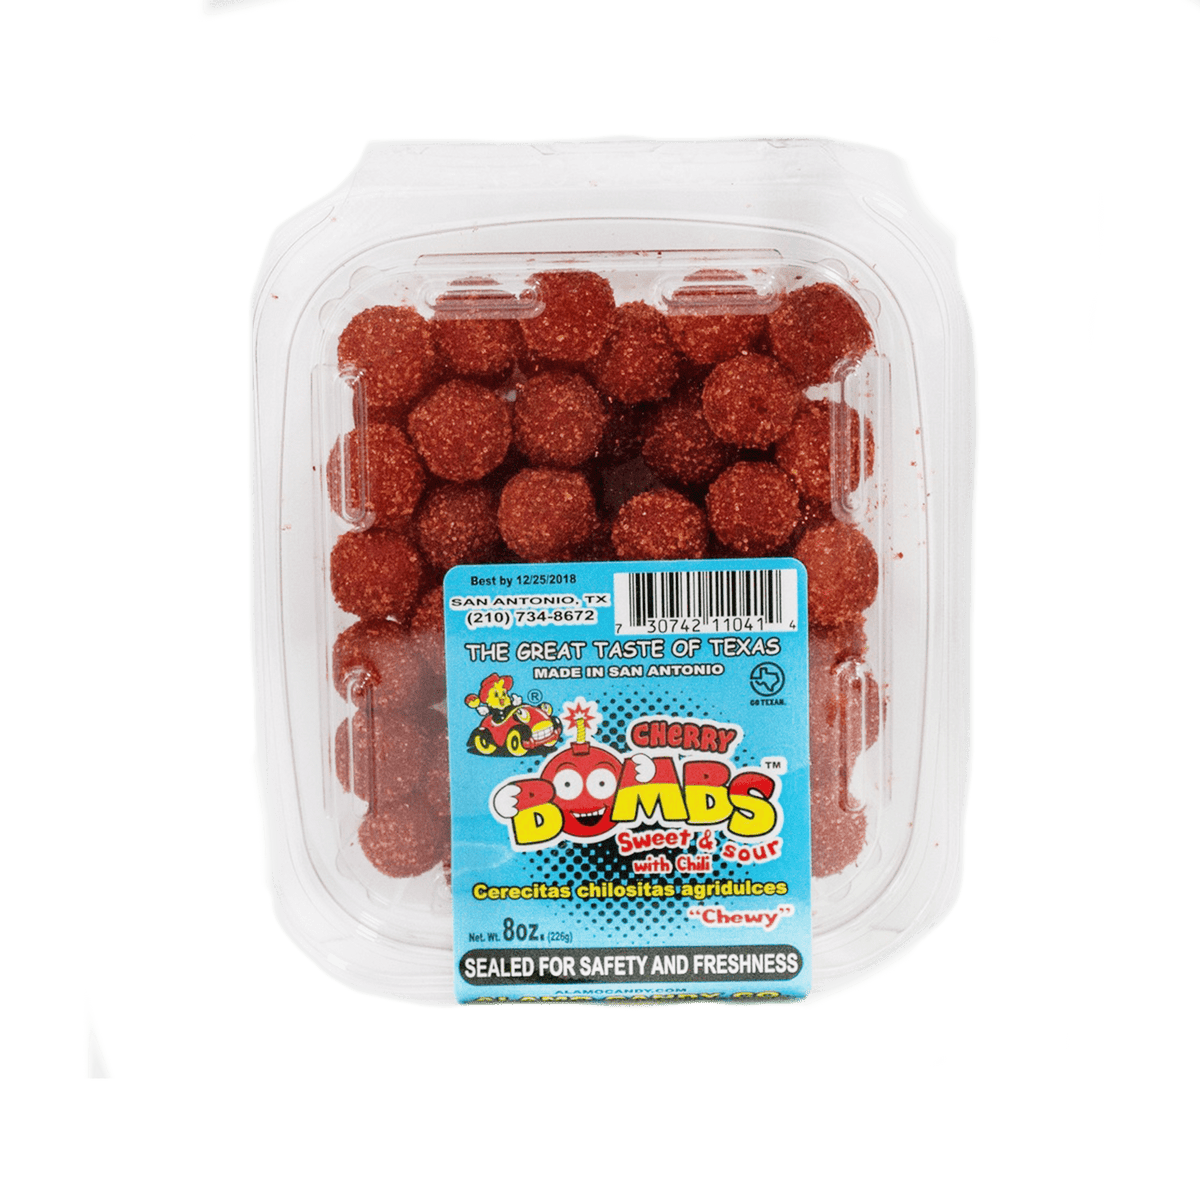 Lolli and Pops International Sweet &amp; Sour Cherry Bombs